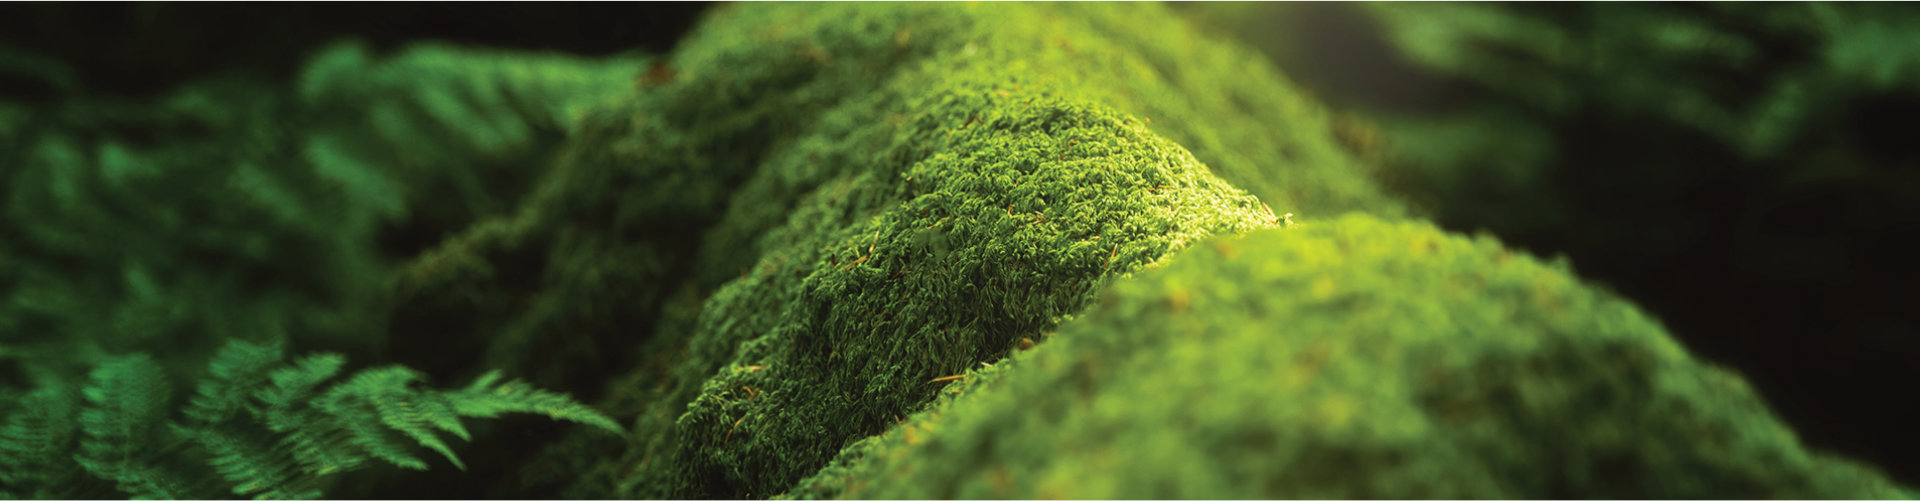 Moss and earth